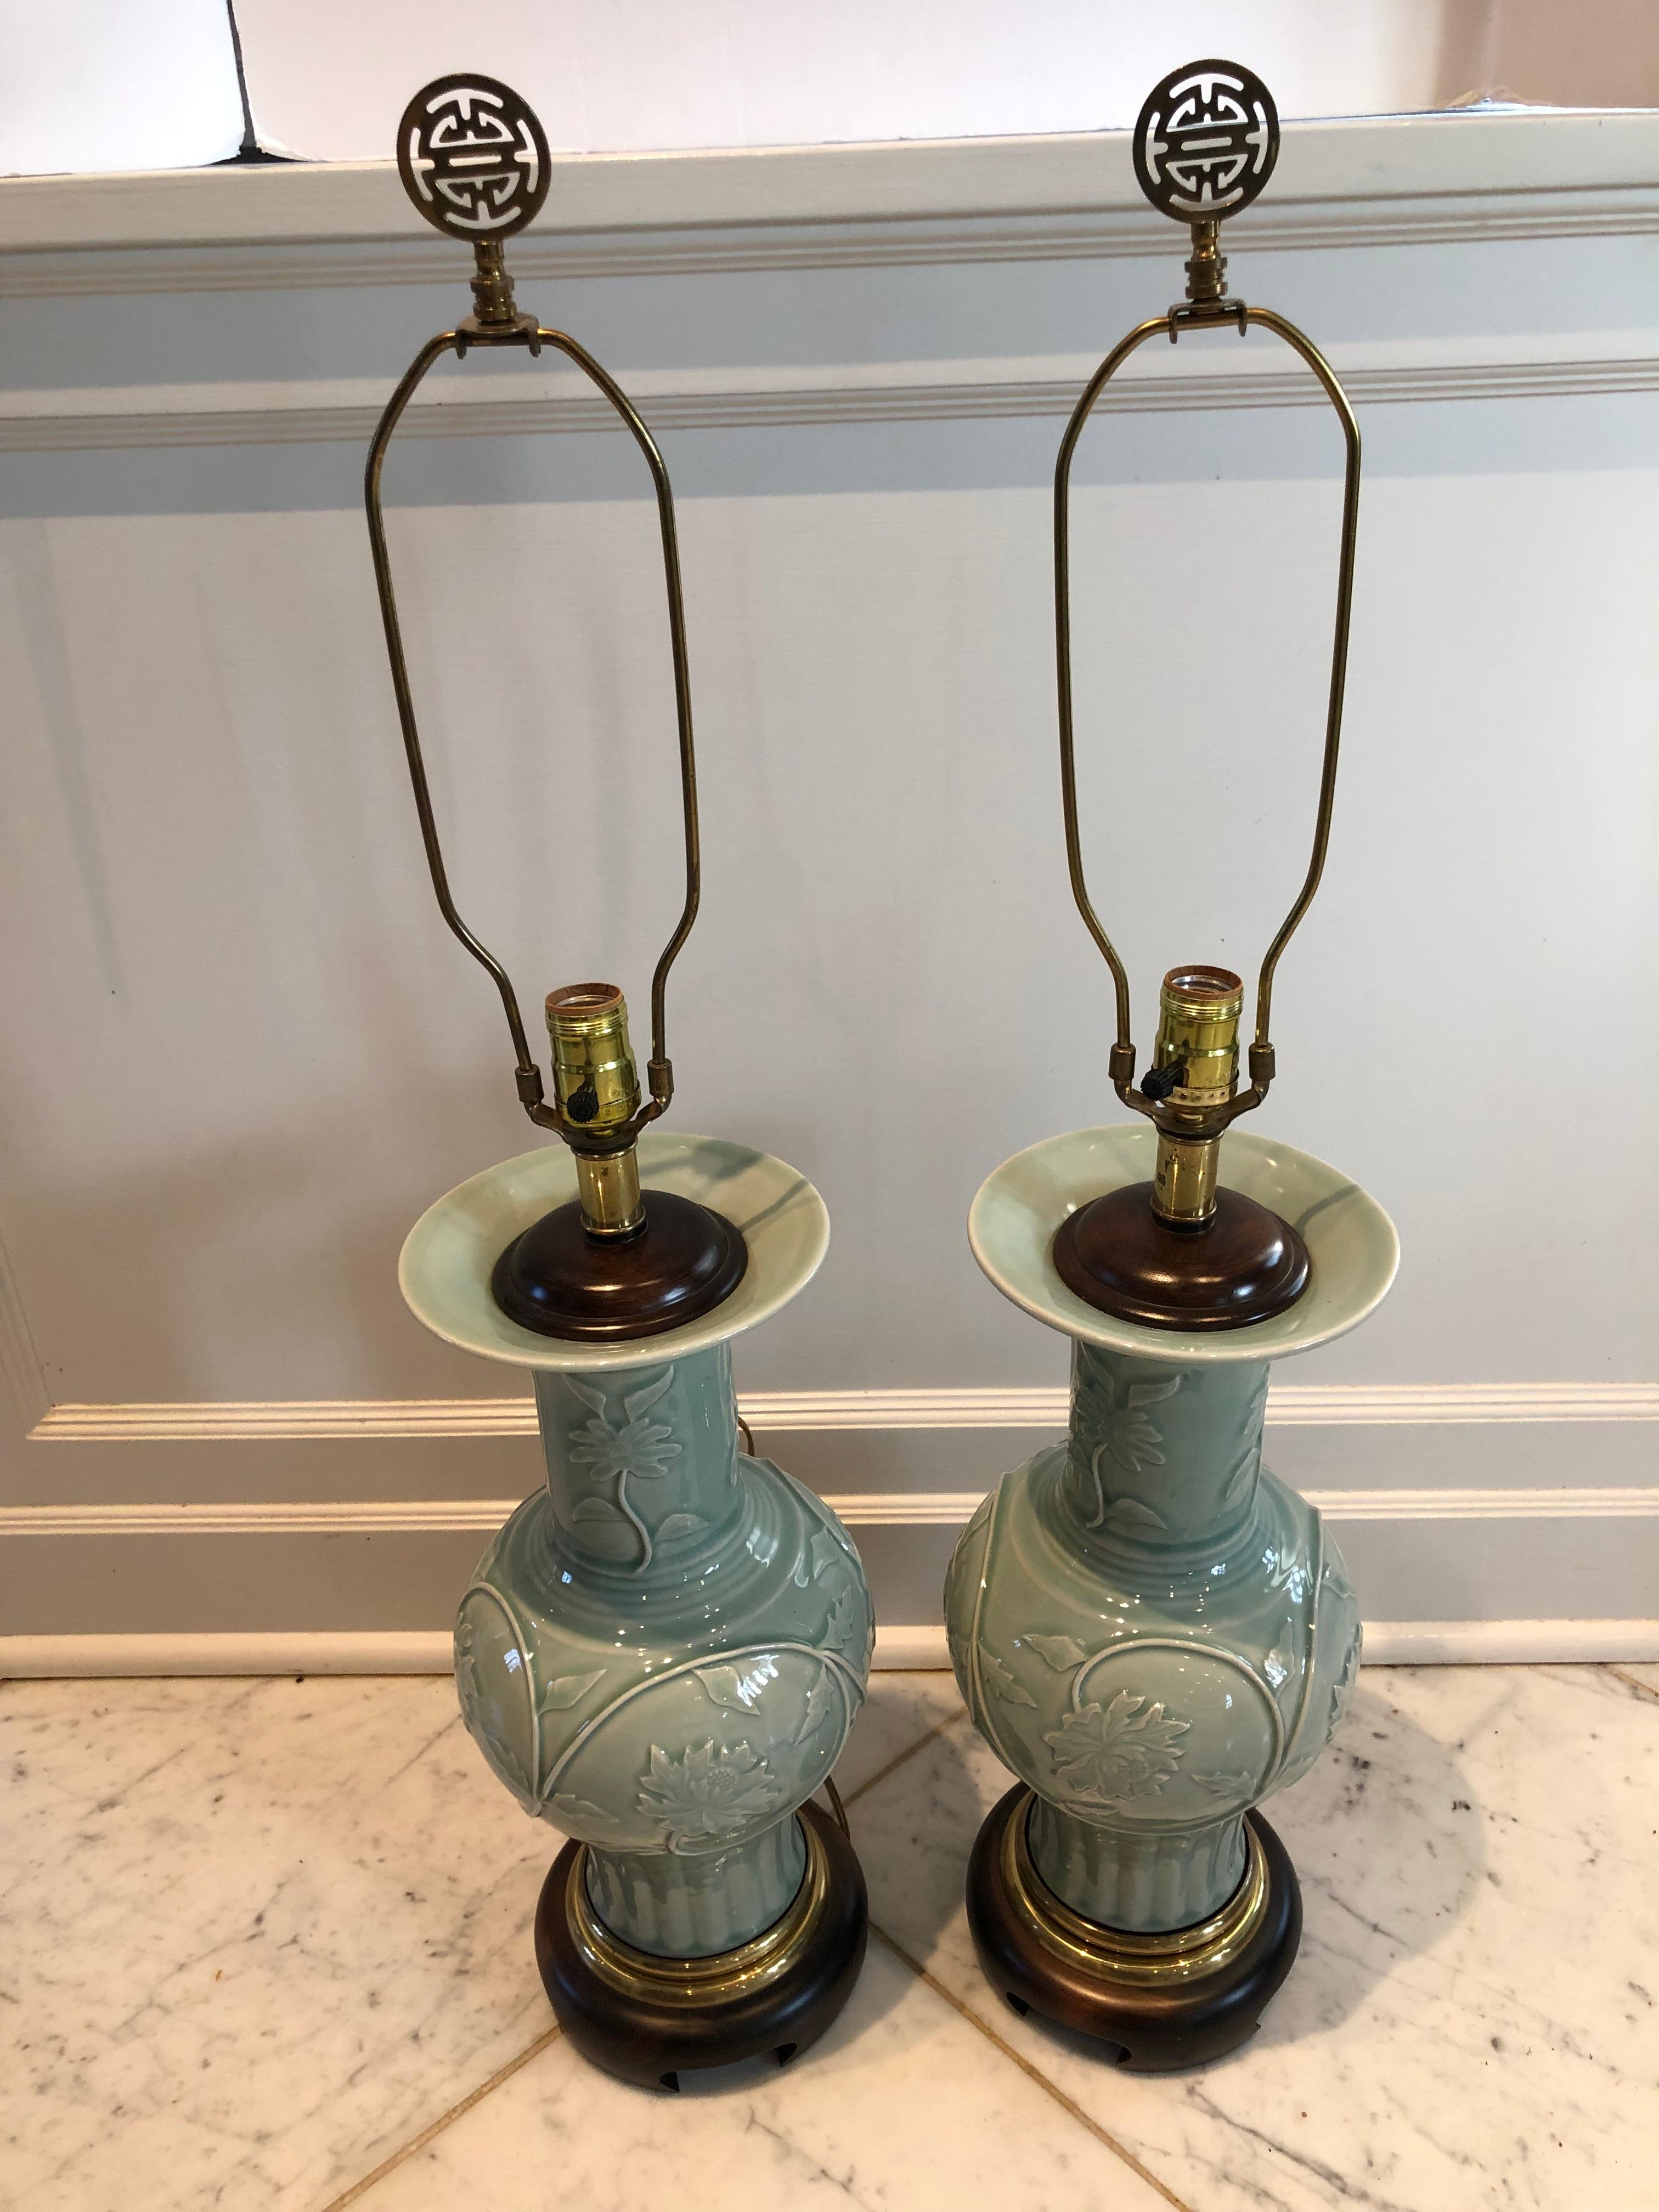 Pair of beautiful celadon table lamps by Frederick Cooper having an embossed floral design and resting on rosewood bases. Brass finials have an Asian design. Marked Frederick Cooper. No shades.